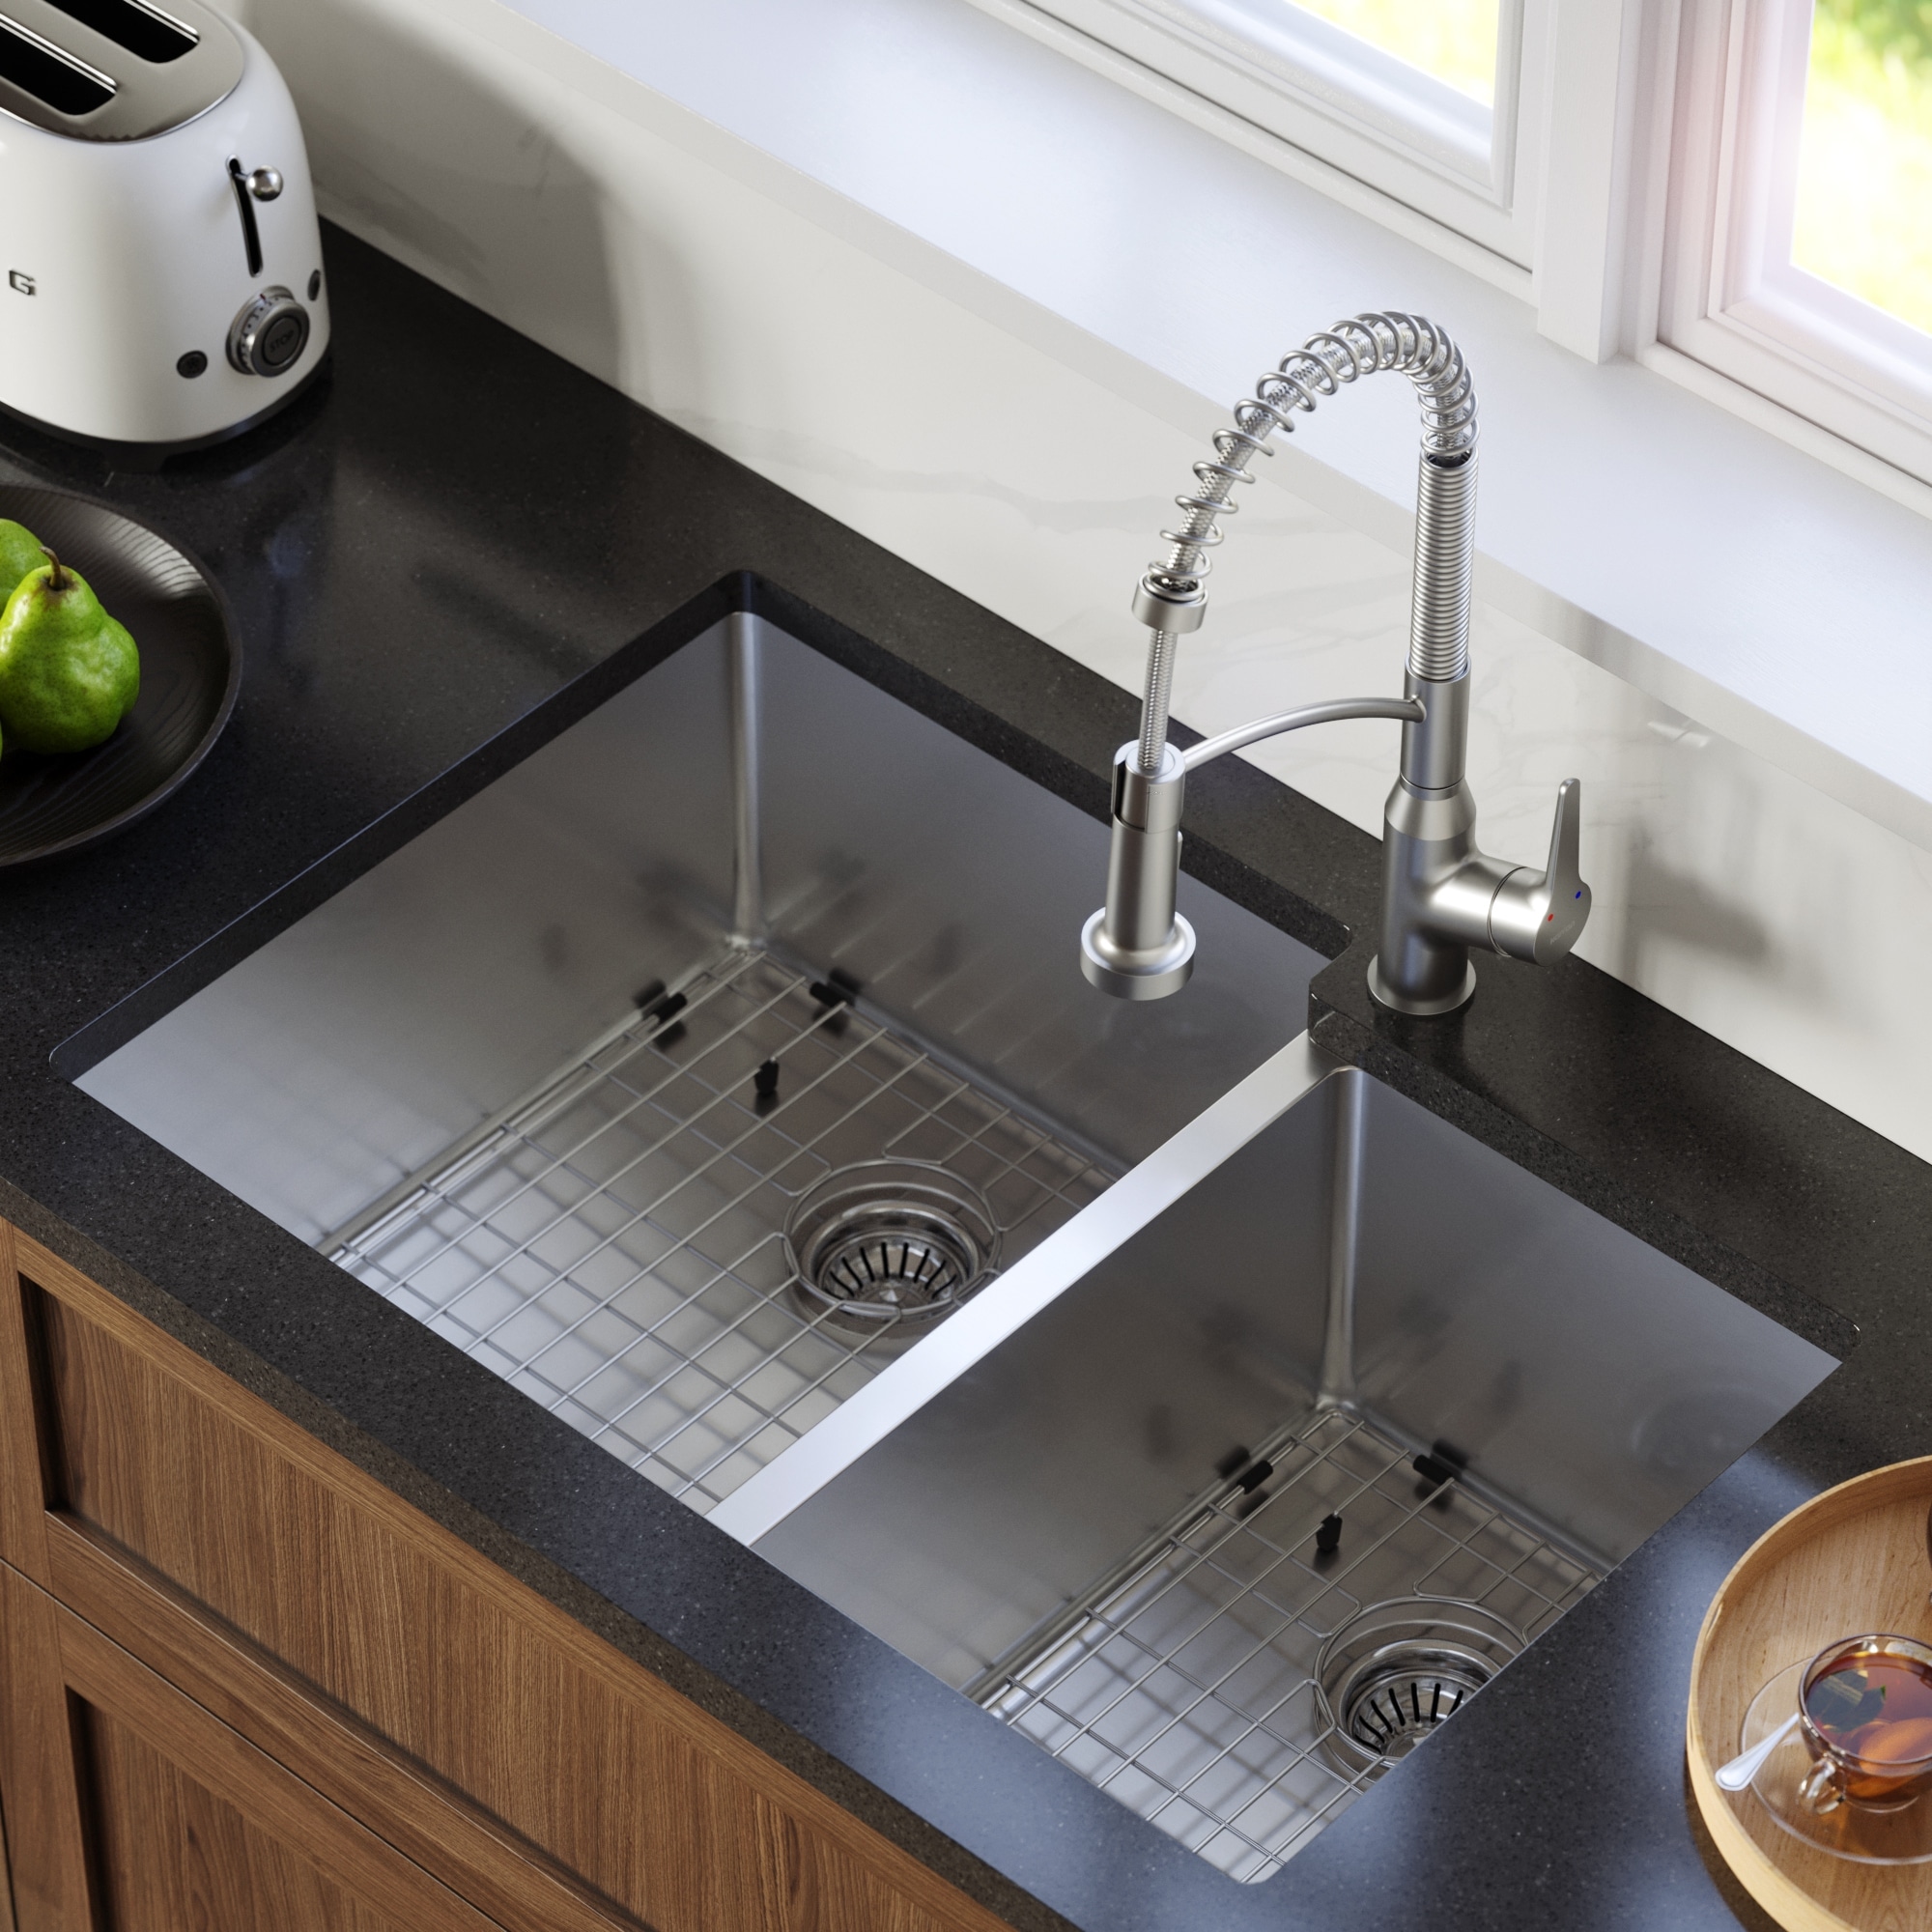 Kitchen sink with Faucet Kitchen Round sink bar Counter Gold Stainless Steel Nano sink Including Faucet and Accessories